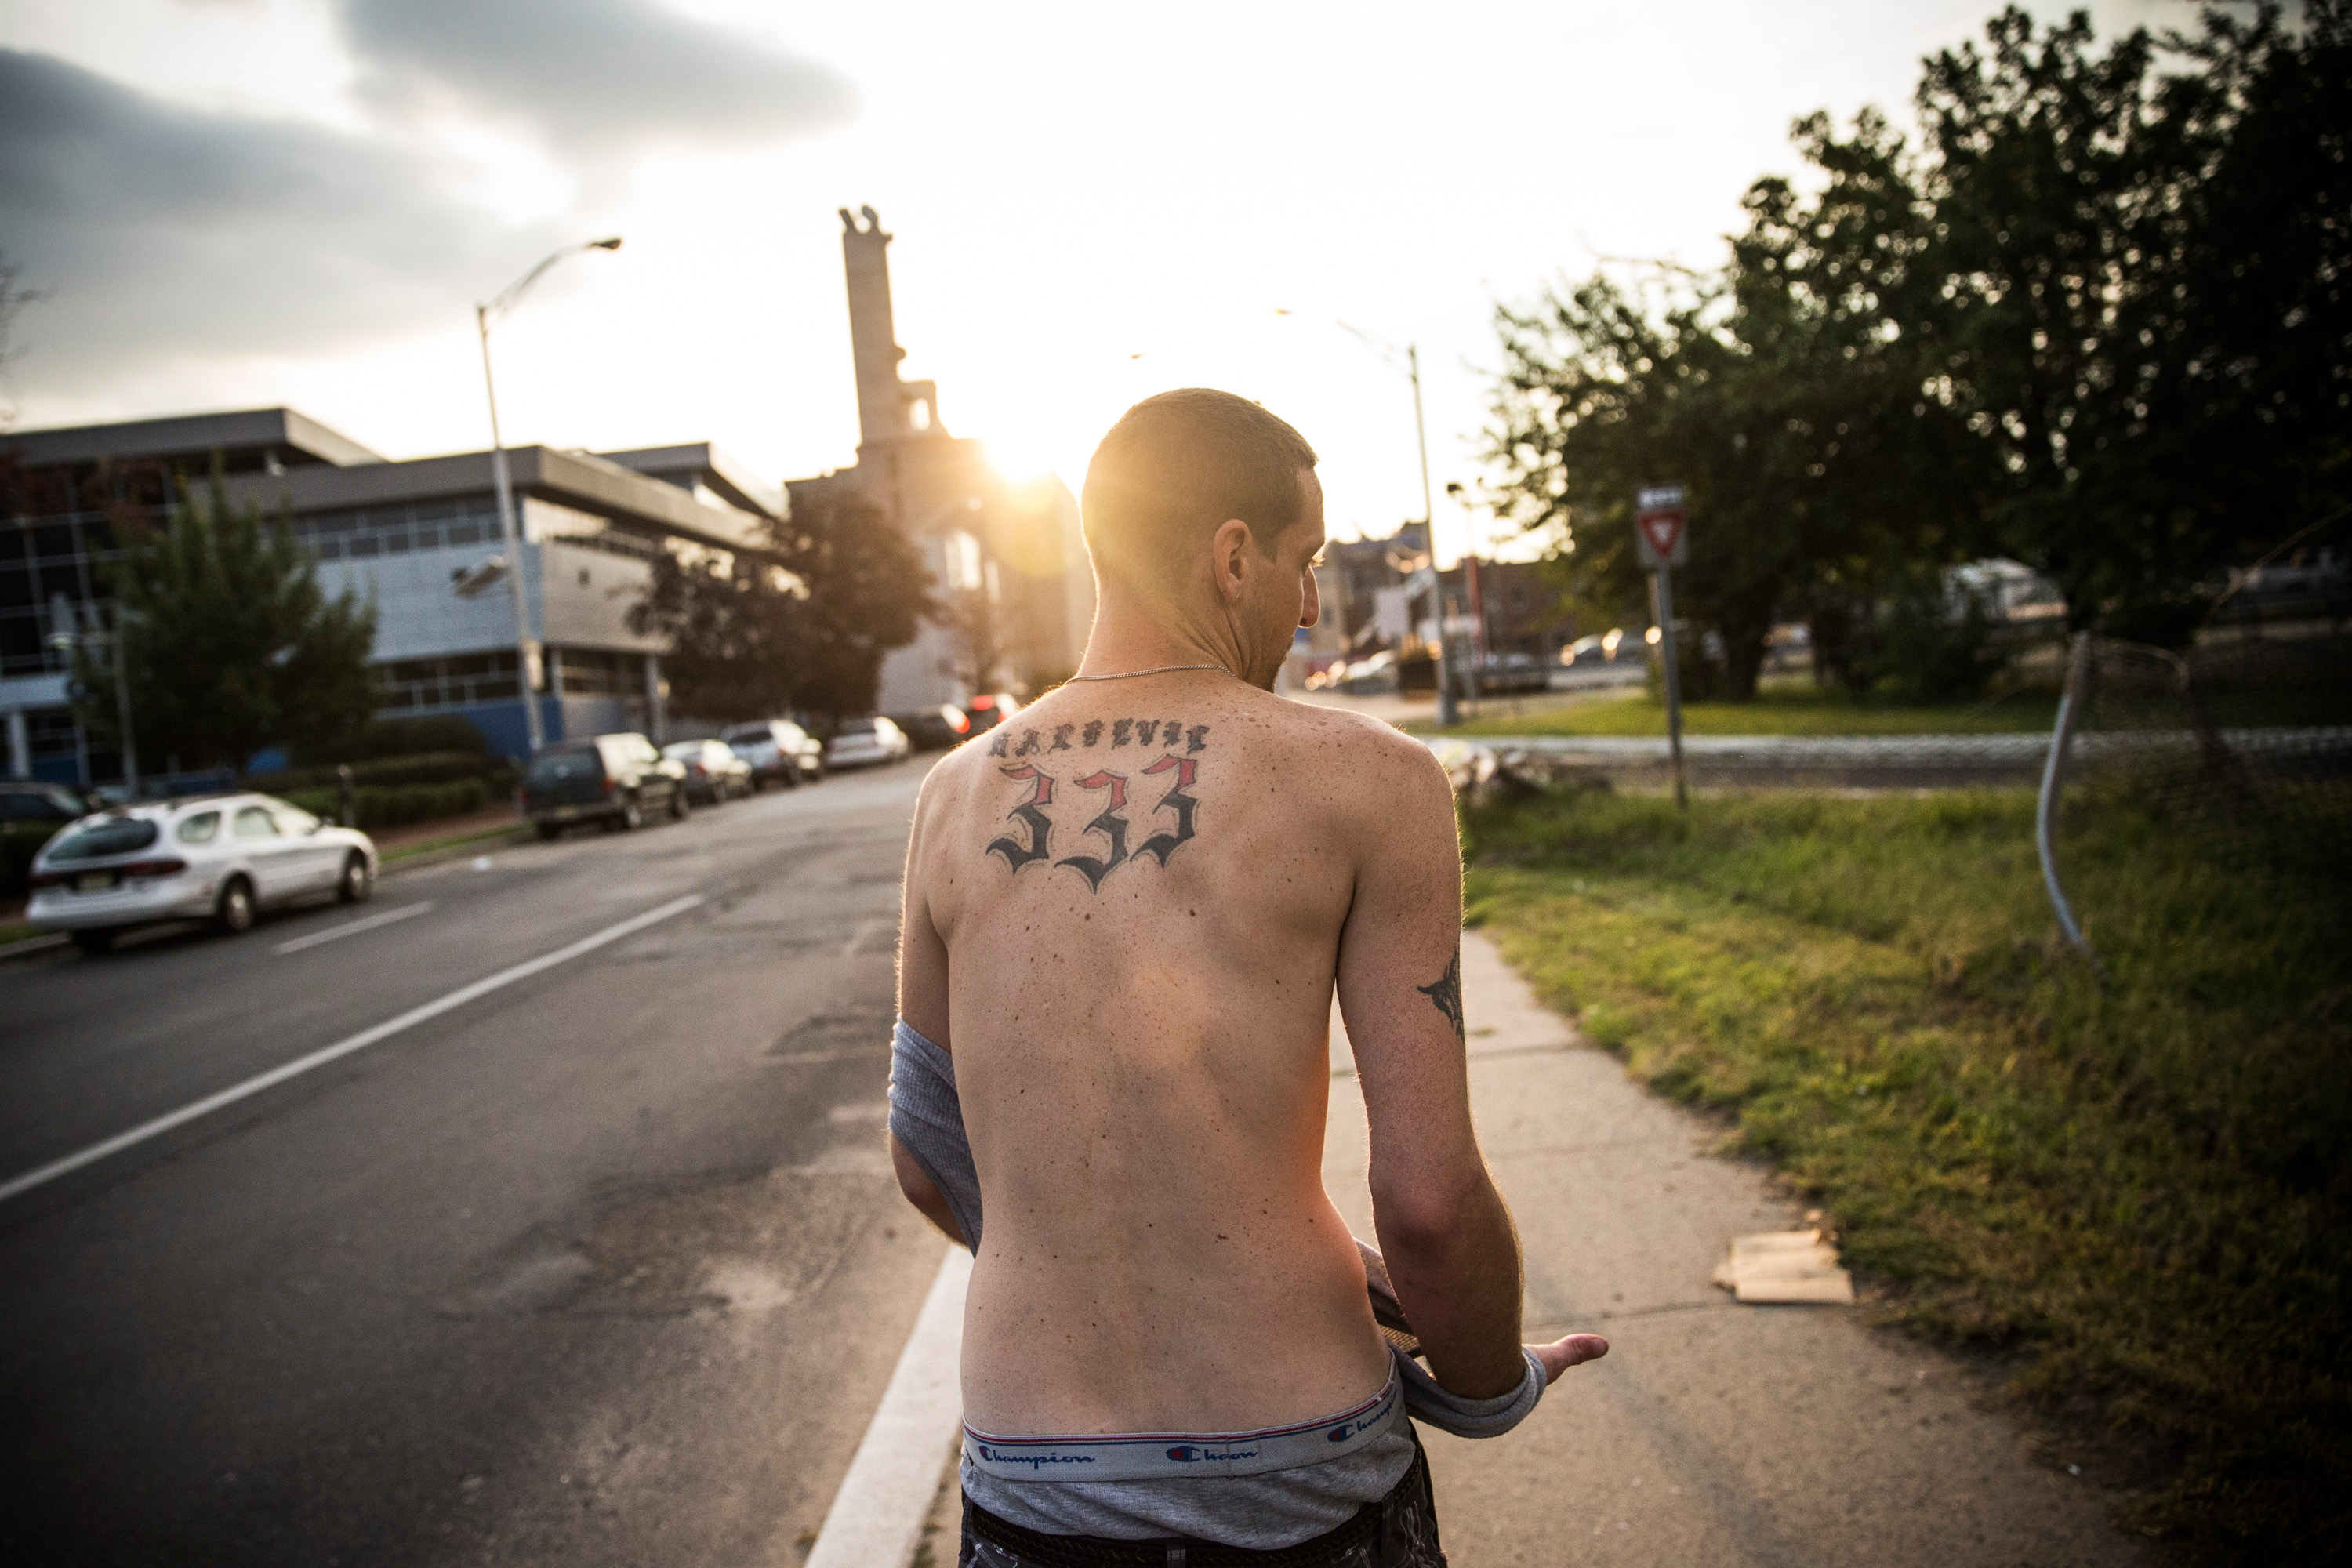 Reggy Colby, age 30 and a recovering heroin addict, walks down the street, on Aug. 21, 2013 in Camden, NJ. (Andrew Burton—Getty Images)